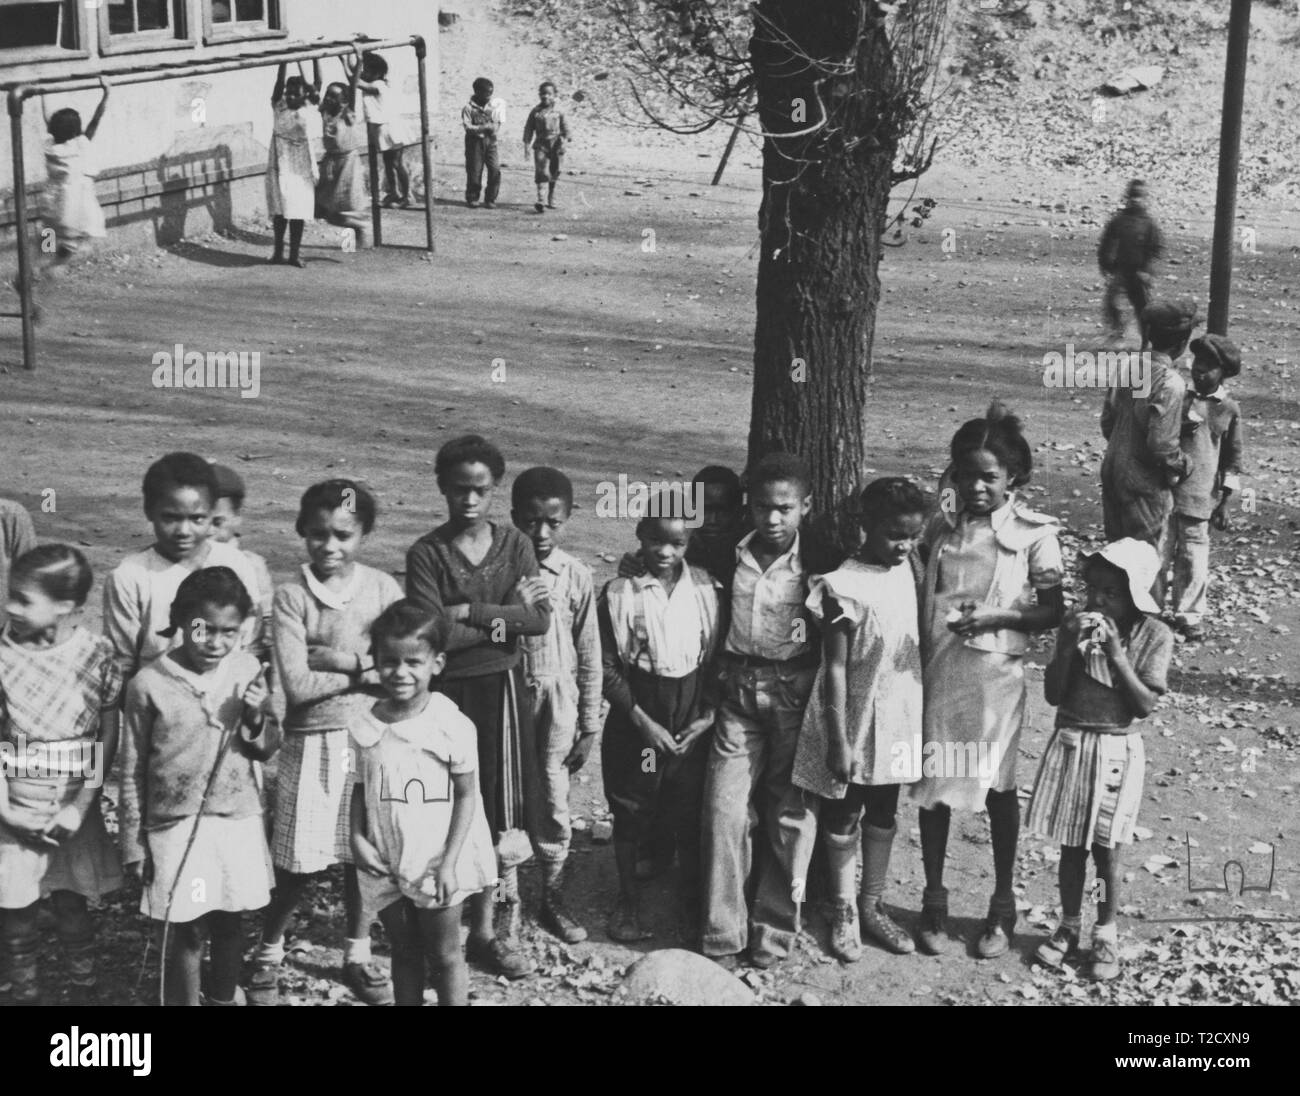 Black and white photograph of a group of African American children, standing together under a tree, facing the camera, with more children, some chatting, others swinging on monkey bars or a climbing frame, visible in the background; located in Kentucky, USA; photographed by Ben Shahn, under the sponsorship of the United States' Farm Security Administration, 1935. From the New York Public Library. () Stock Photo